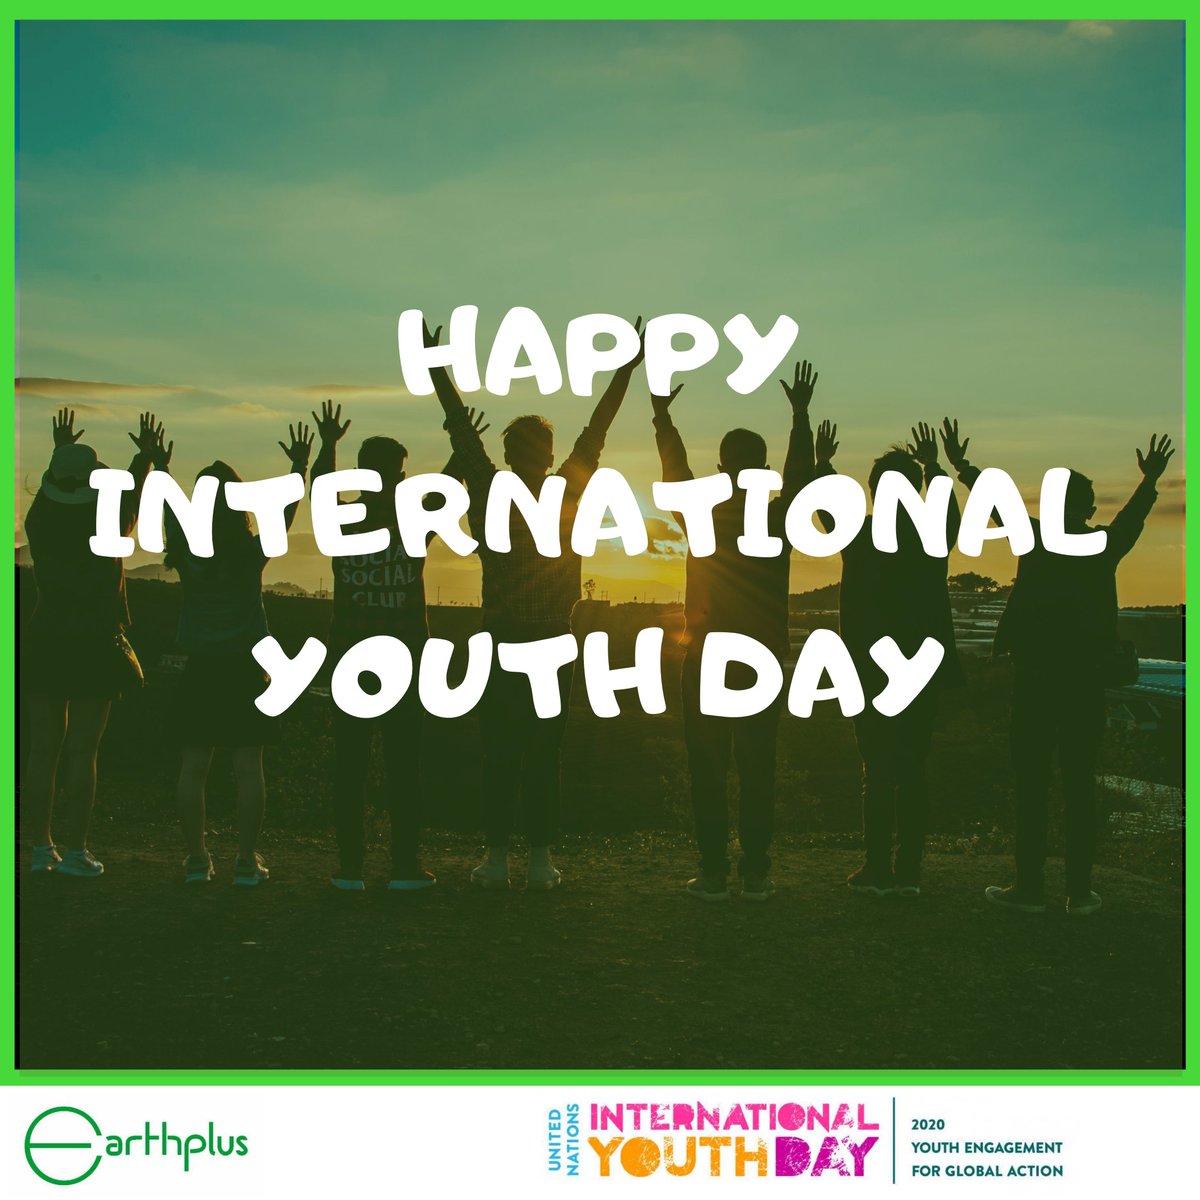 Today, we join youths from all over the world to celebrate 2020 International Youth Day. The theme for this year's celebration is "Youth Engagement for Global Action." It recalls the necessity for active youth participation in the race for sustainability.  #IYD2020  #Thread